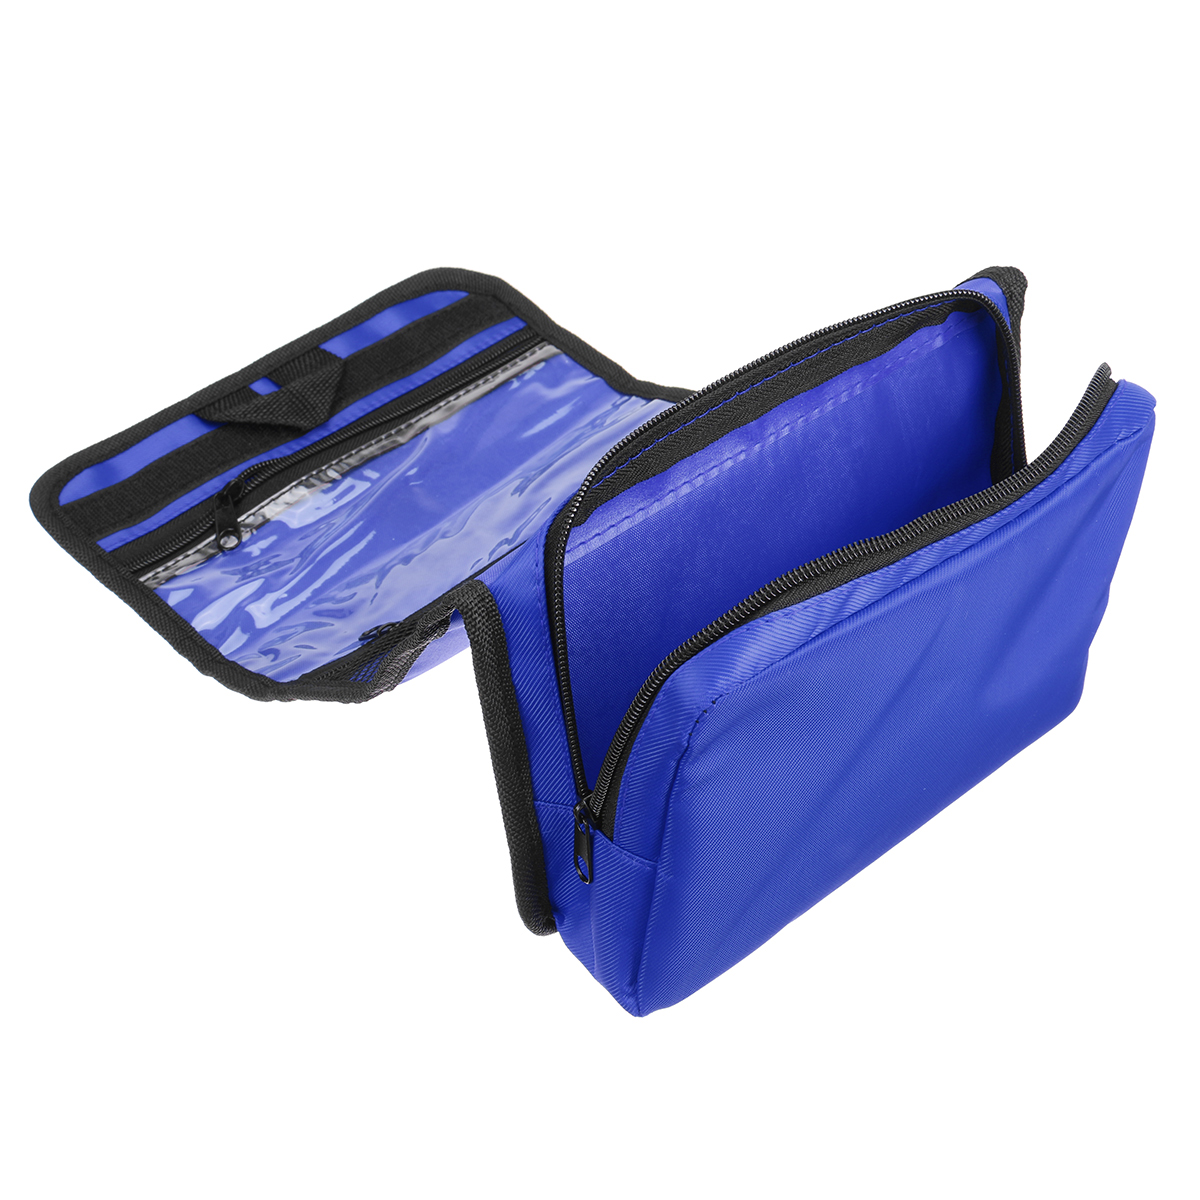 Outdoor-Portable-First-Aid-Kit-Medical-Storage-Bag-Waterproof-Car-Carrying-Household-Emergency-Kit-T-1757235-9